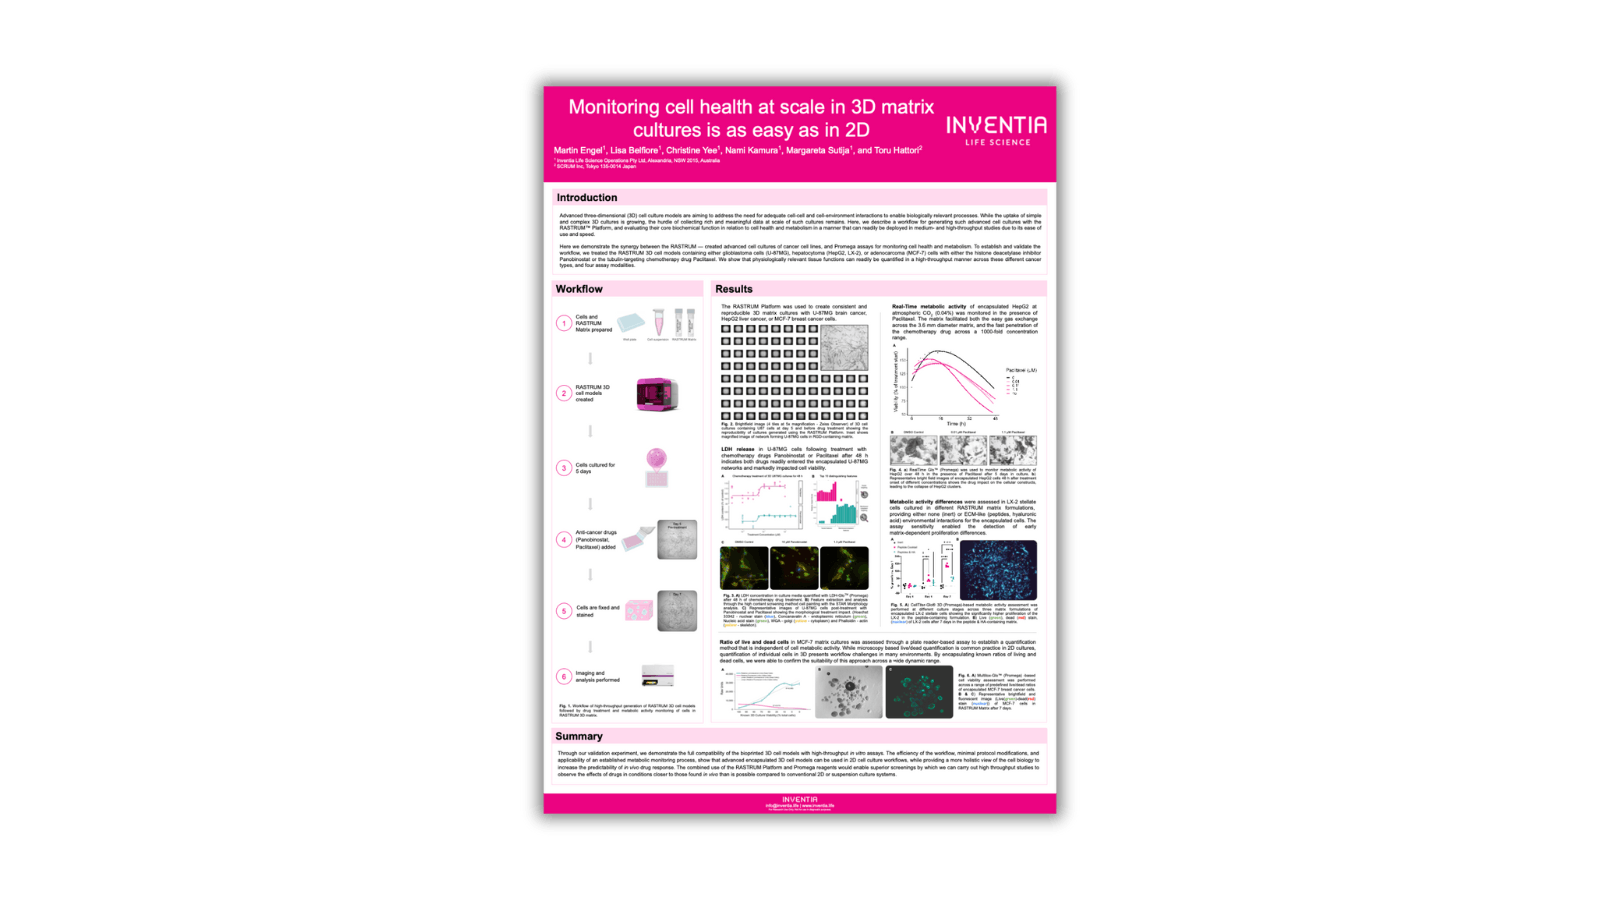 Monitoring cell health at scale in 3D matrix cultures is as easy as in 2D